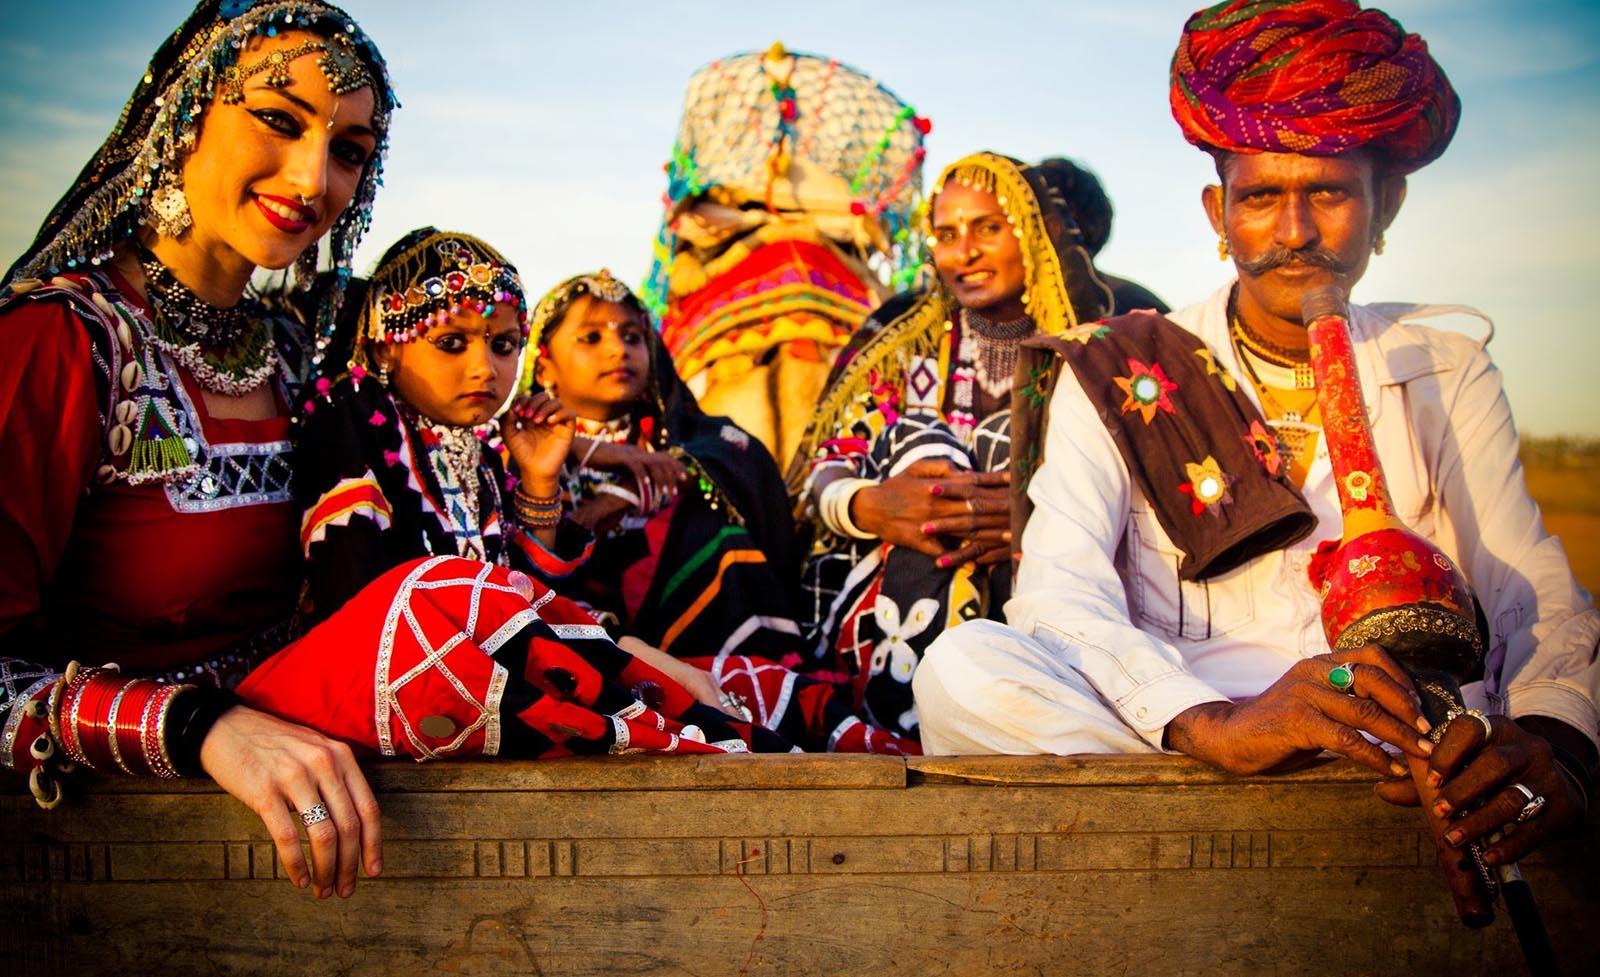 rajasthan people indian culture